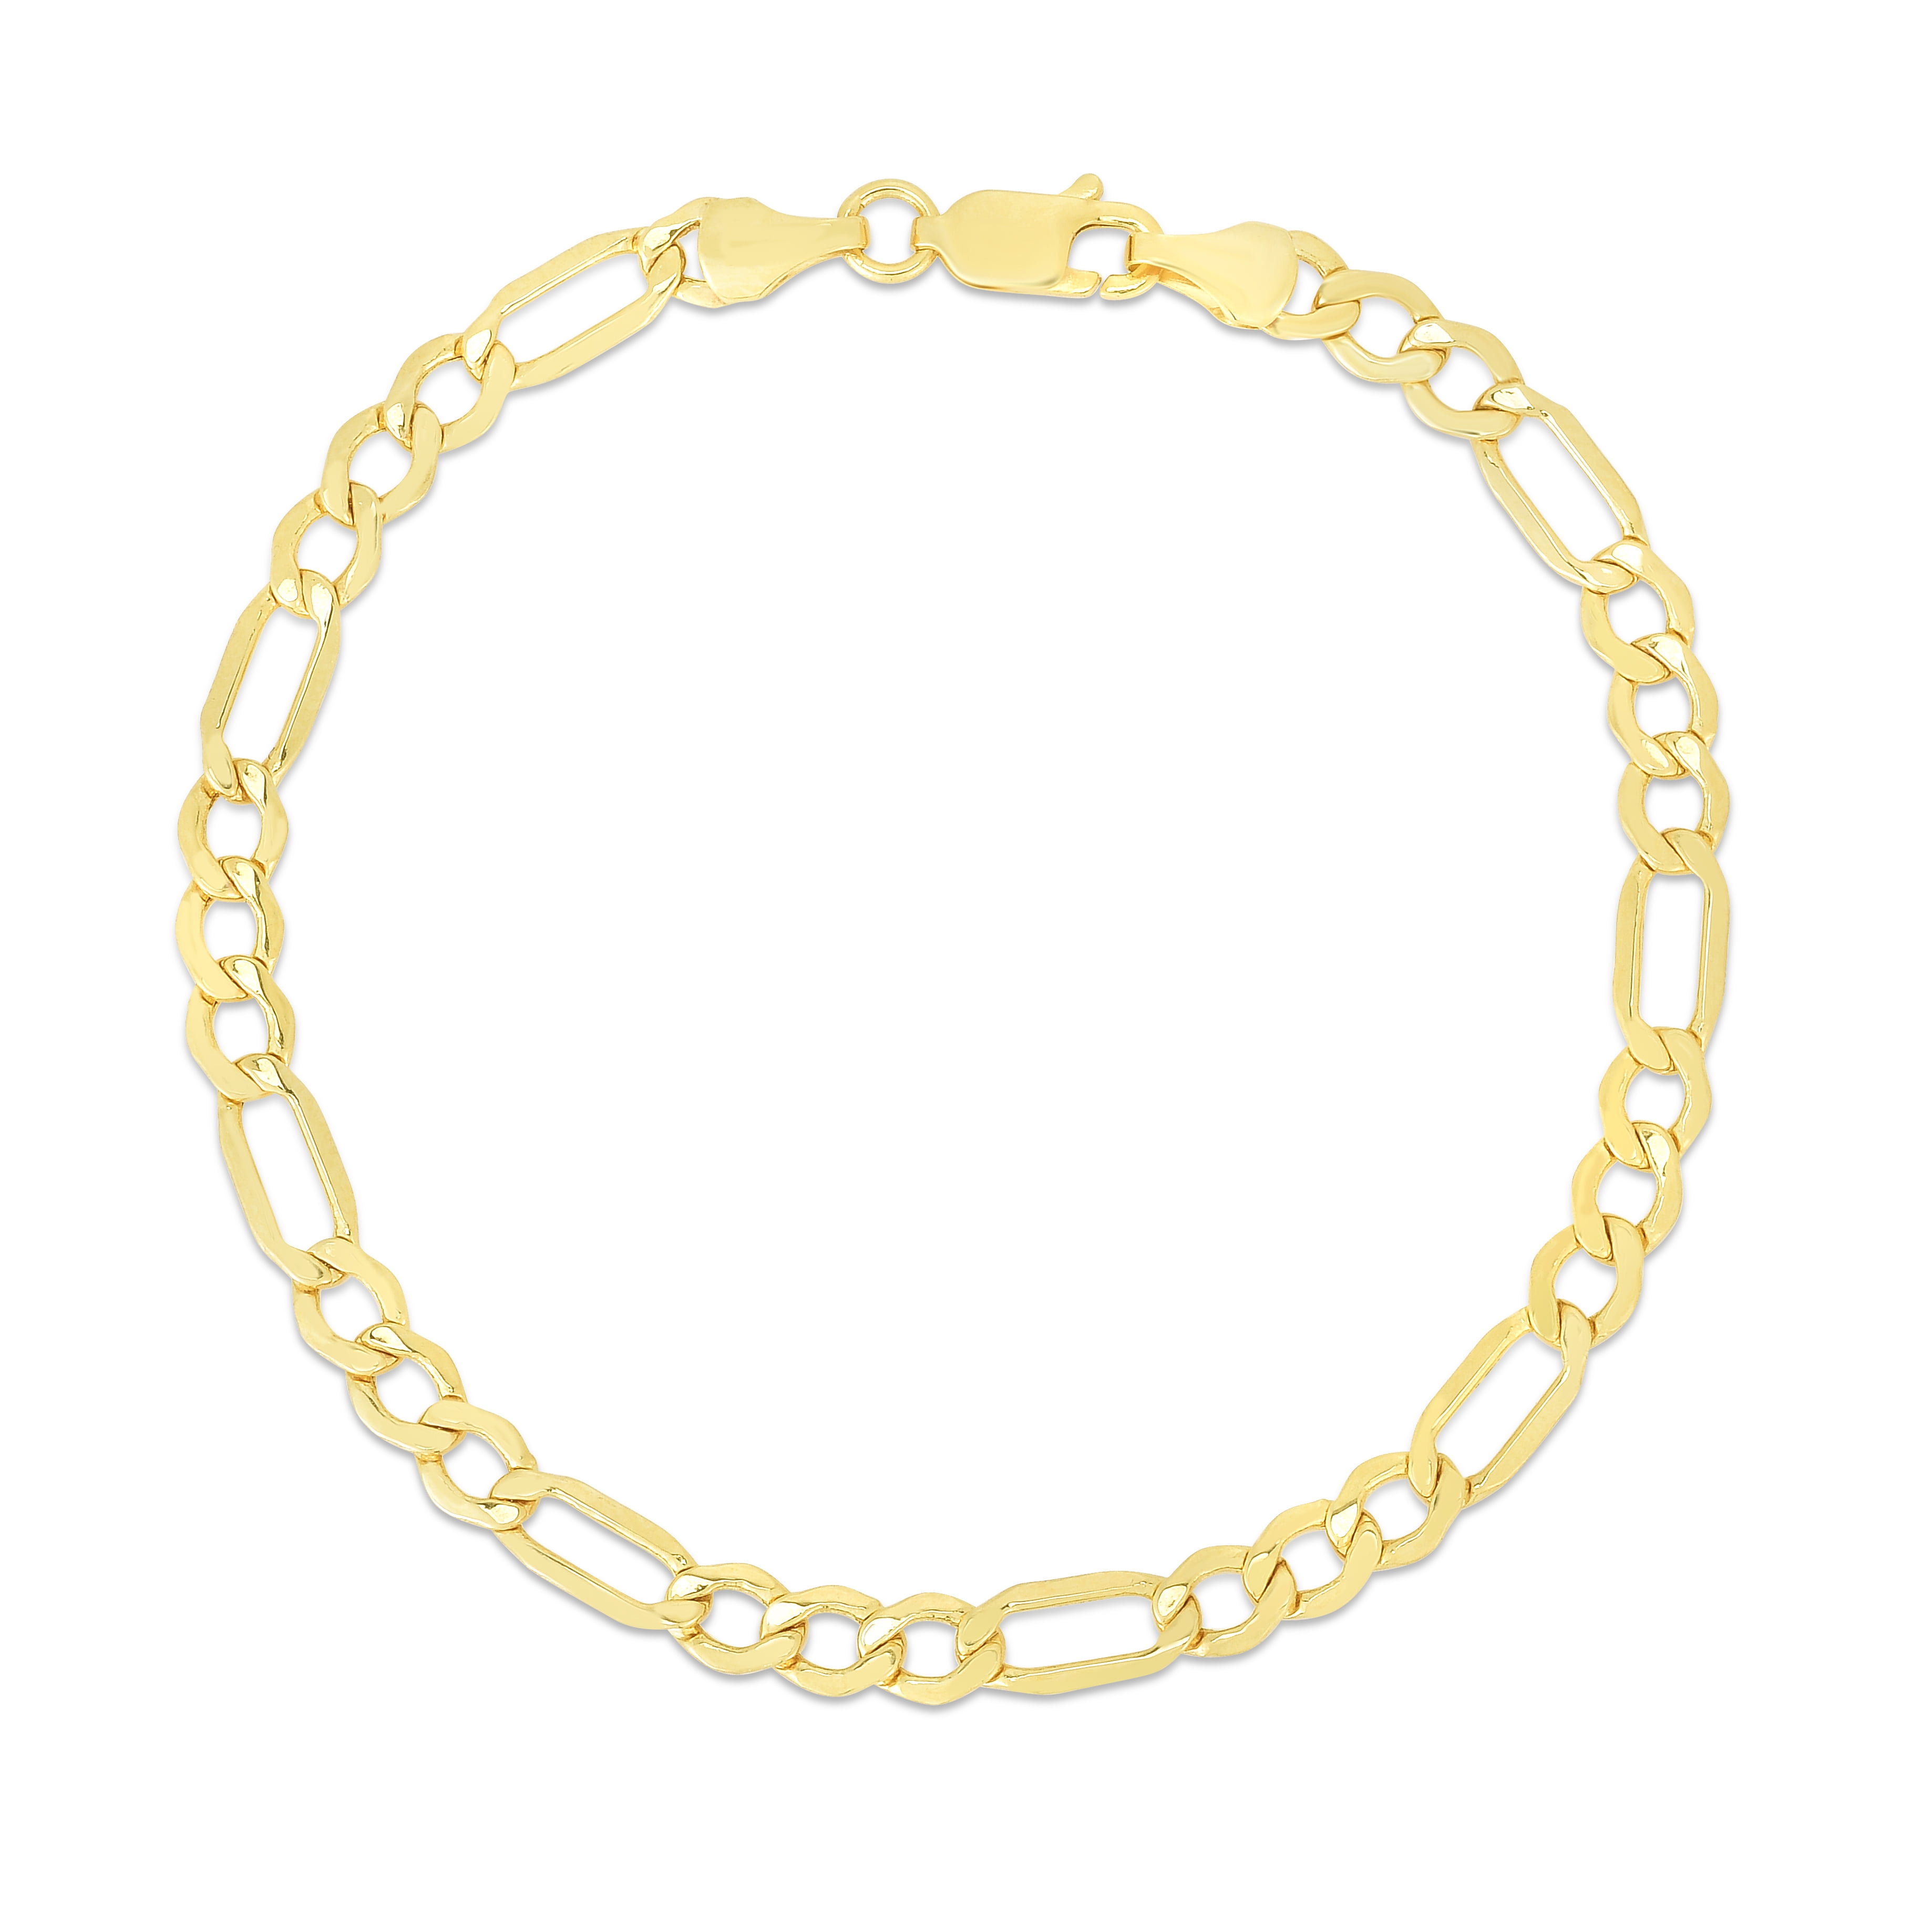 Jewel Tie 10k Gold Hollow Figaro Chain Bracelet with Lobster Clasp 4.6mm 